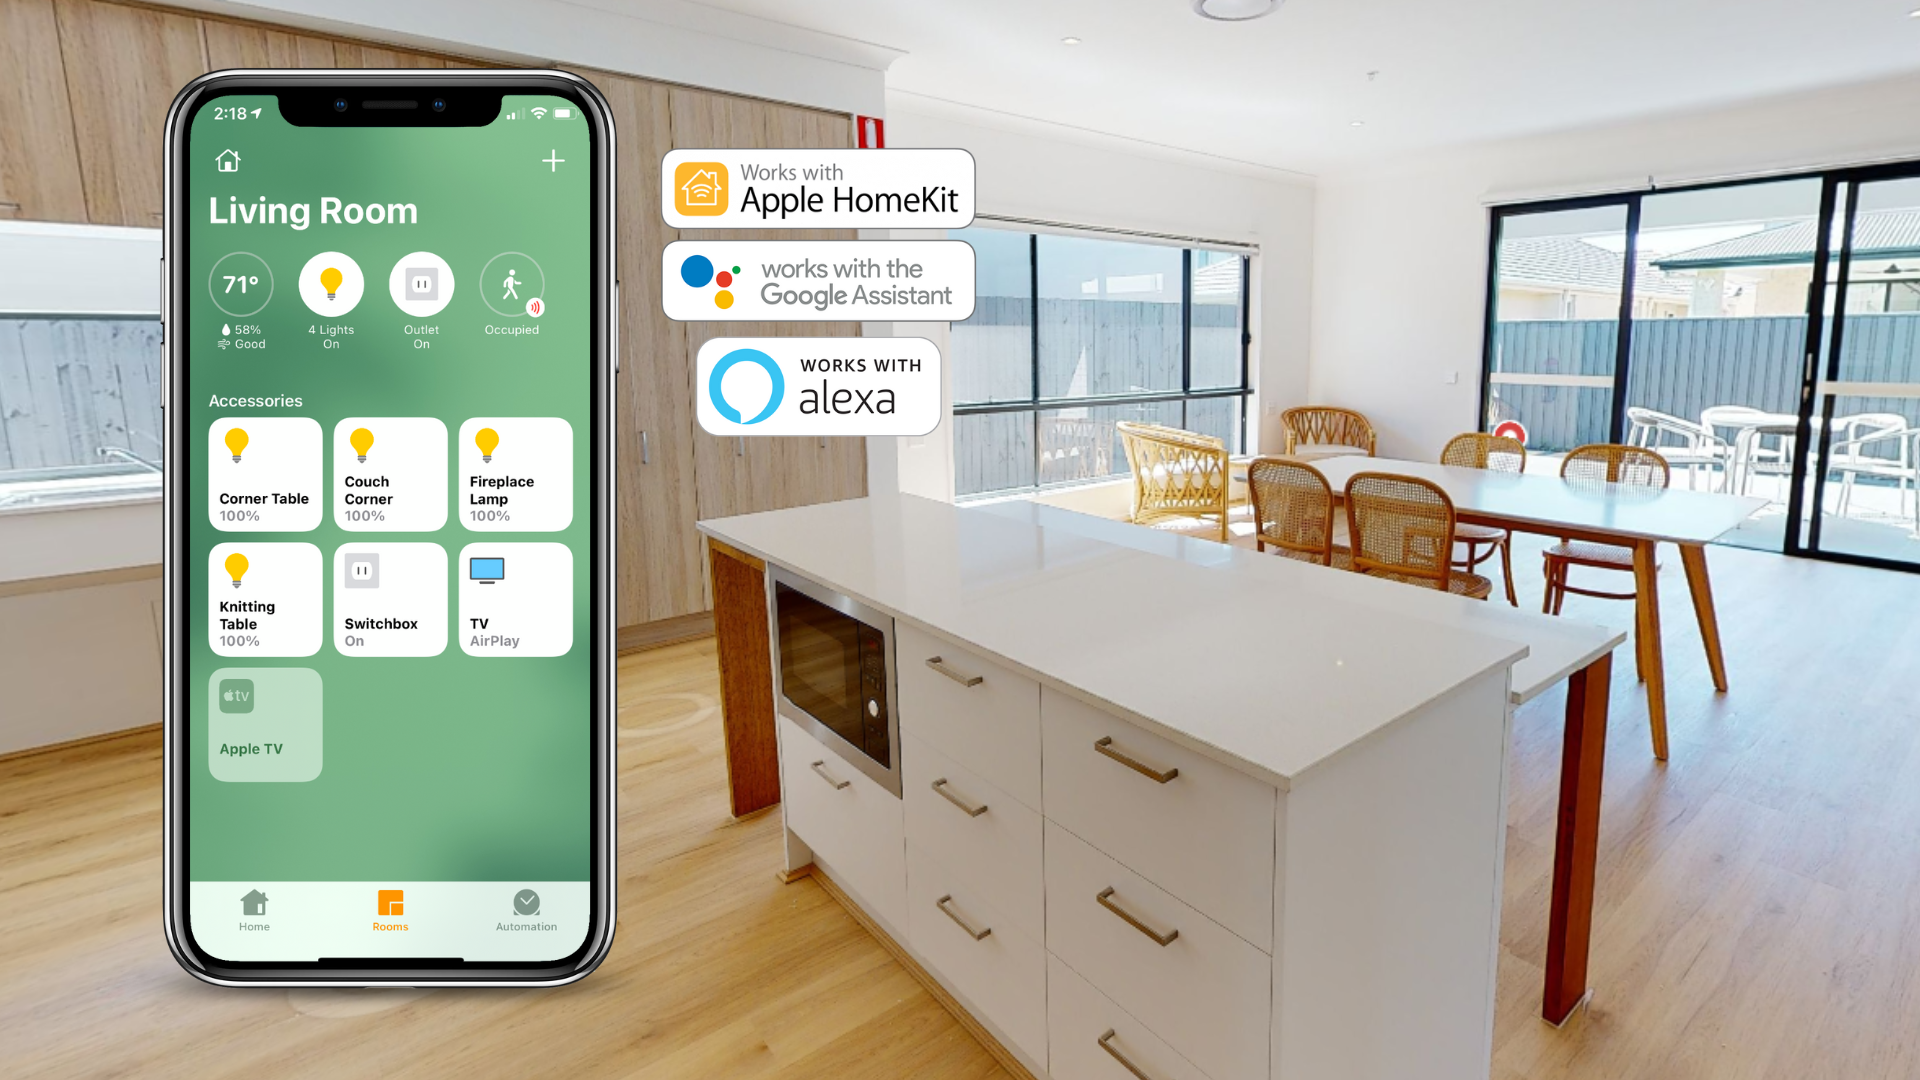 Simple and User-friendly KNX Voice Control Interface Improving the Living Standards of NDIS Home Occupiers